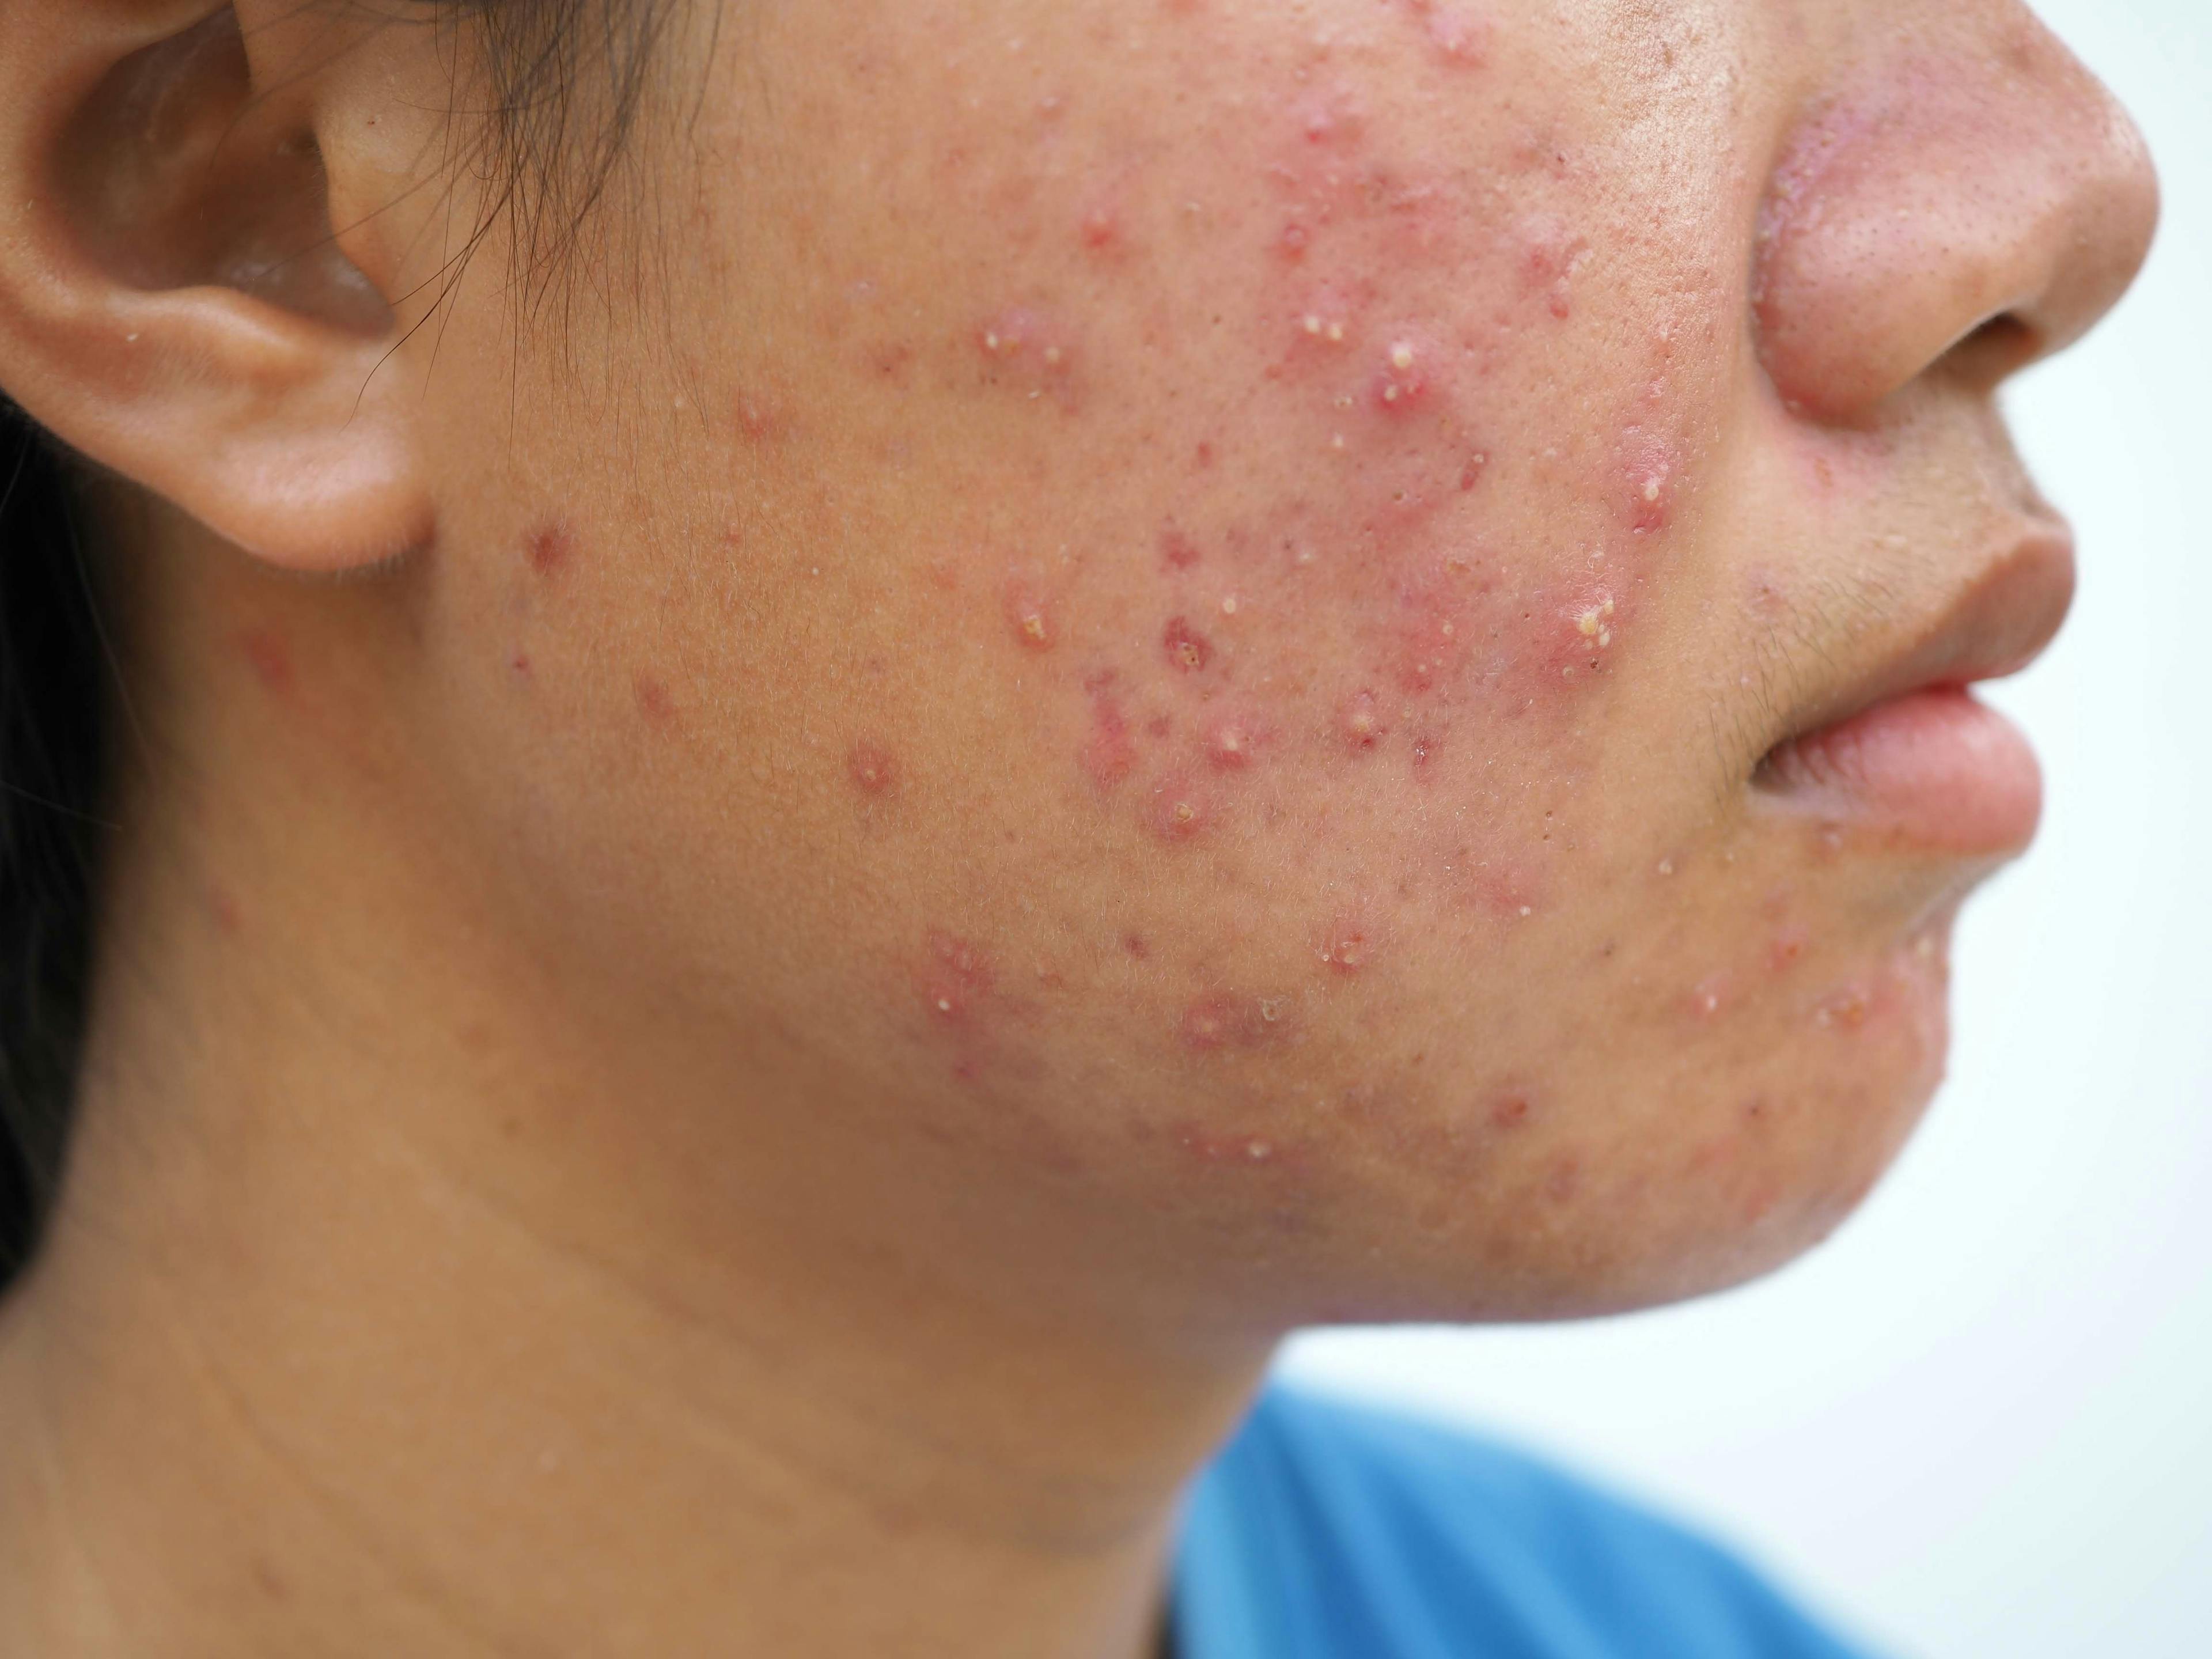 IDP-126 Gel Reduces Inflammatory and Noninflammatory Acne Lesions By 70% 